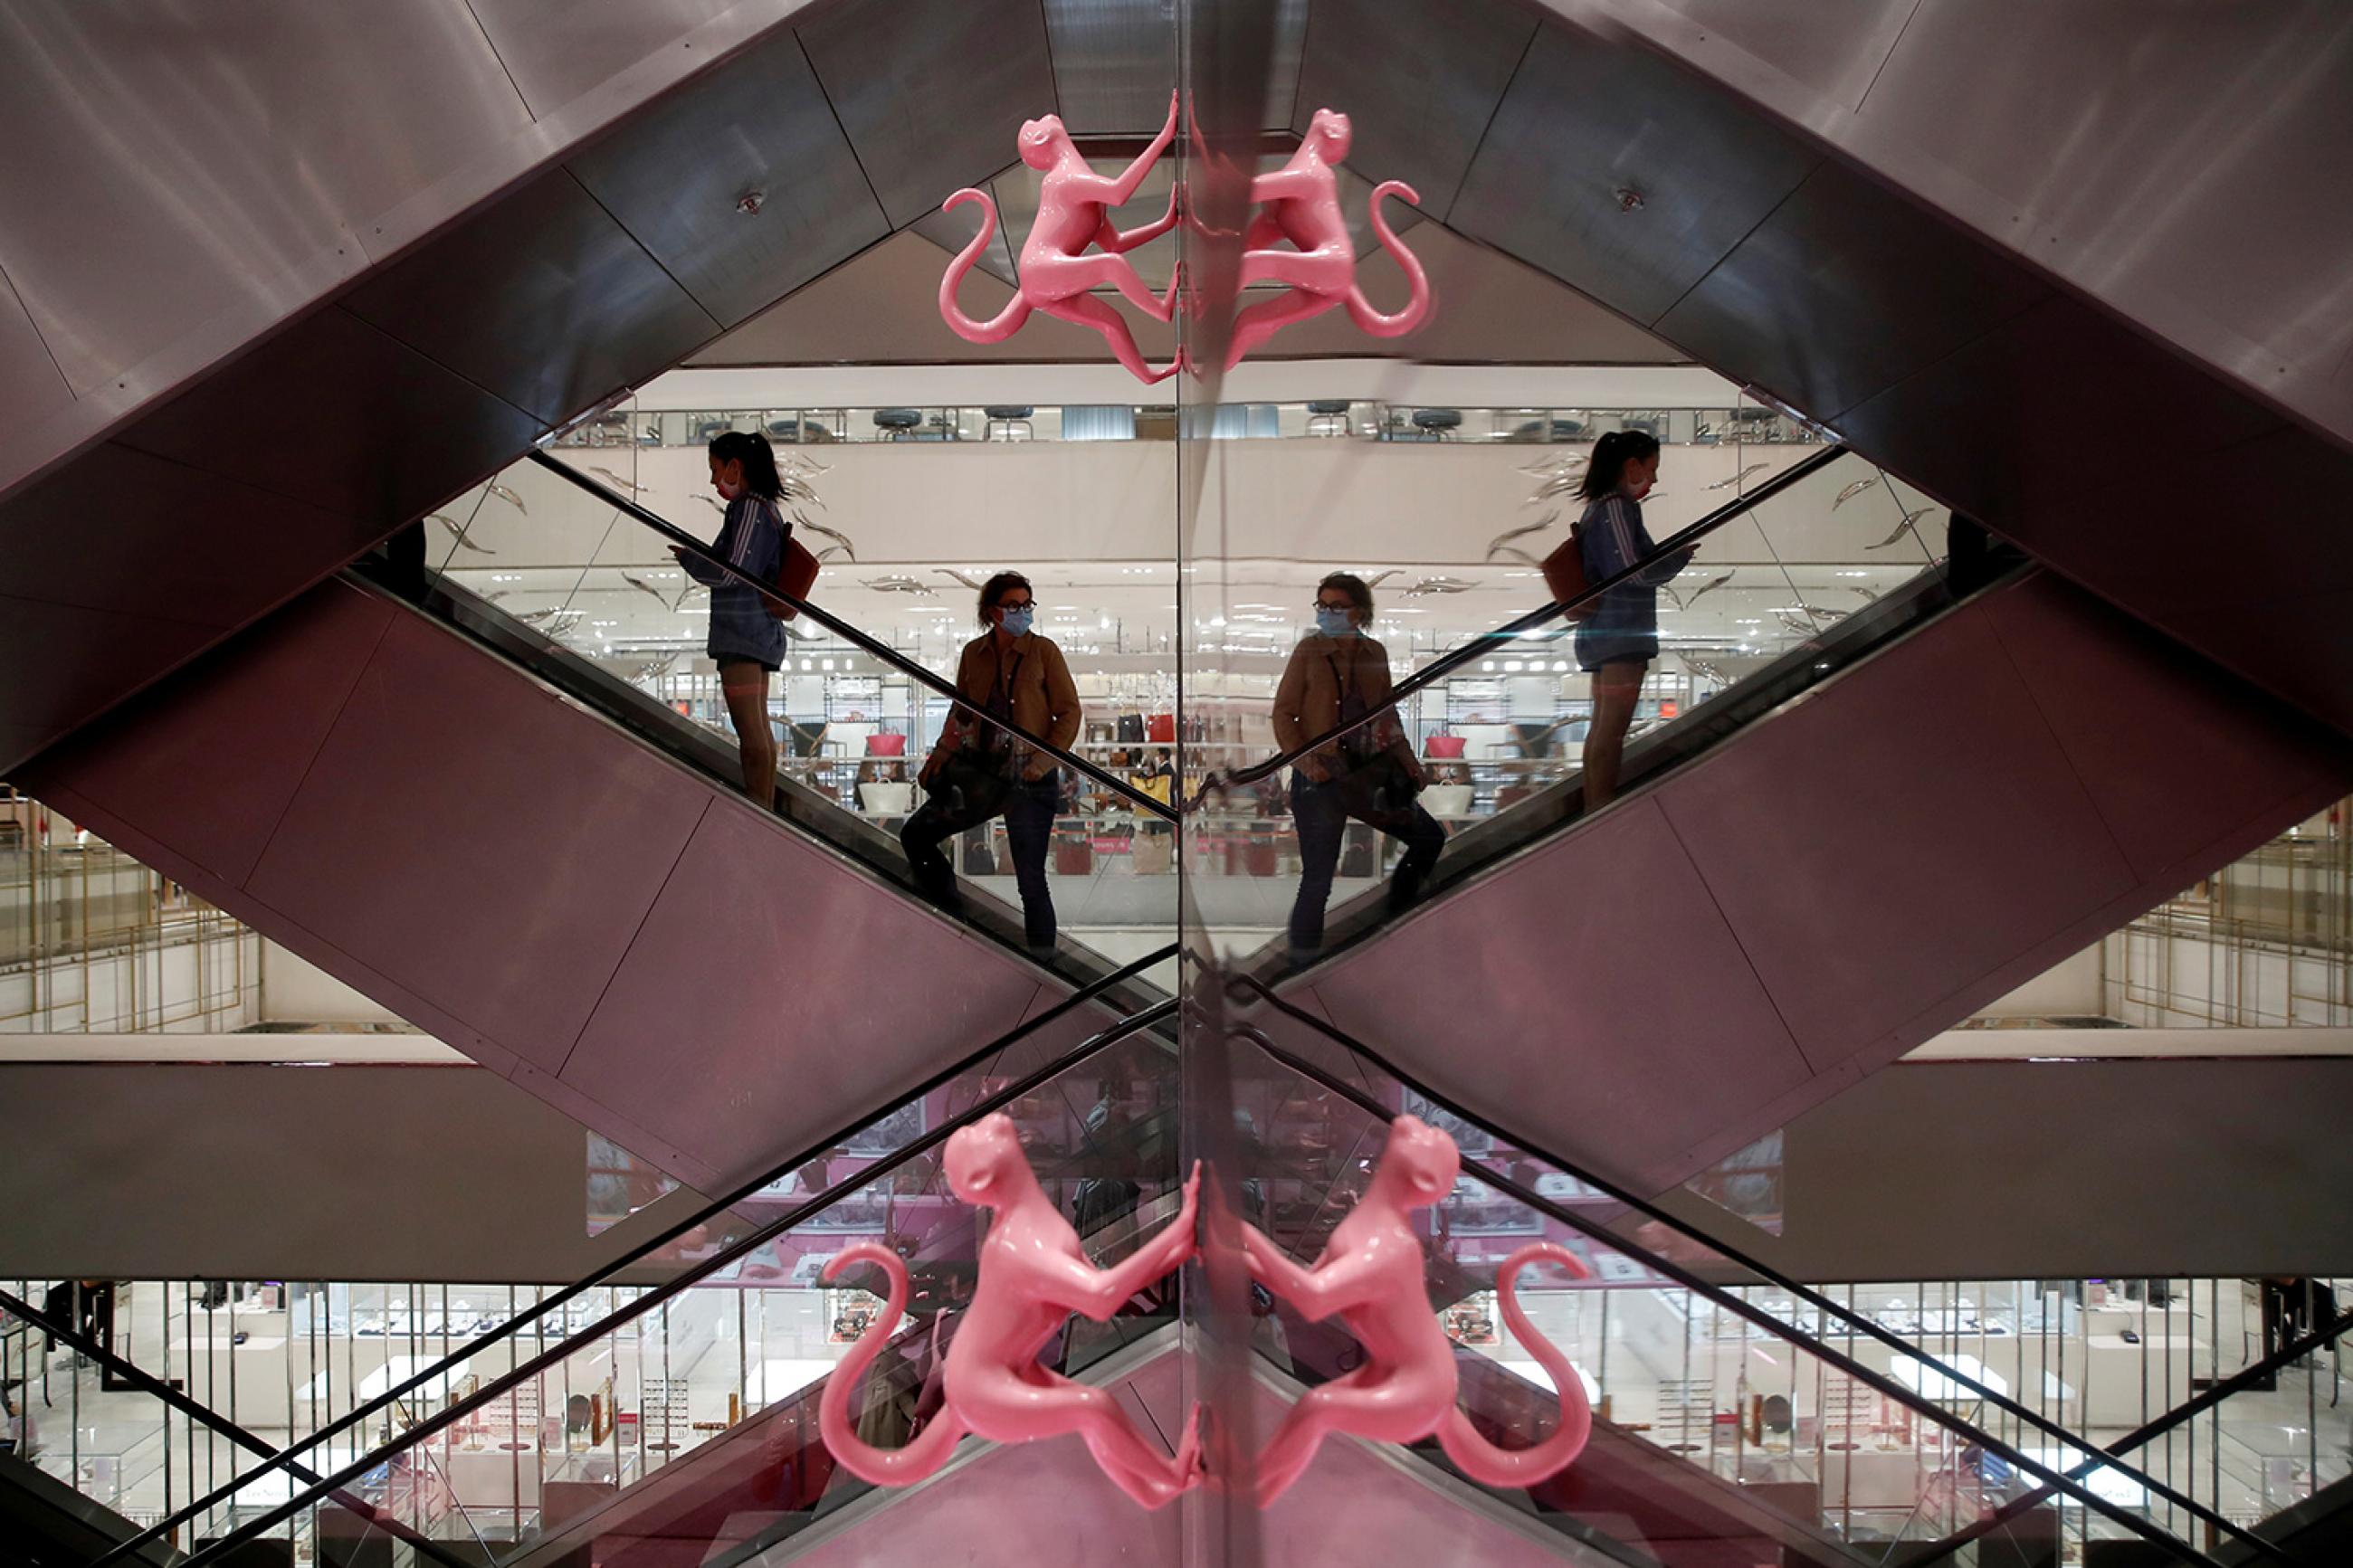 Customers wearing facemasks are reflected in a mirror as they stand on an escalator inside the department store Le Printemps Haussmann in Paris, France, amid the coronavirus pandemic on May 28, 2020. The photo shows people on an escalator with the photo showing mirror images on the left and right of the frame. REUTERS/Gonzalo Fuentes